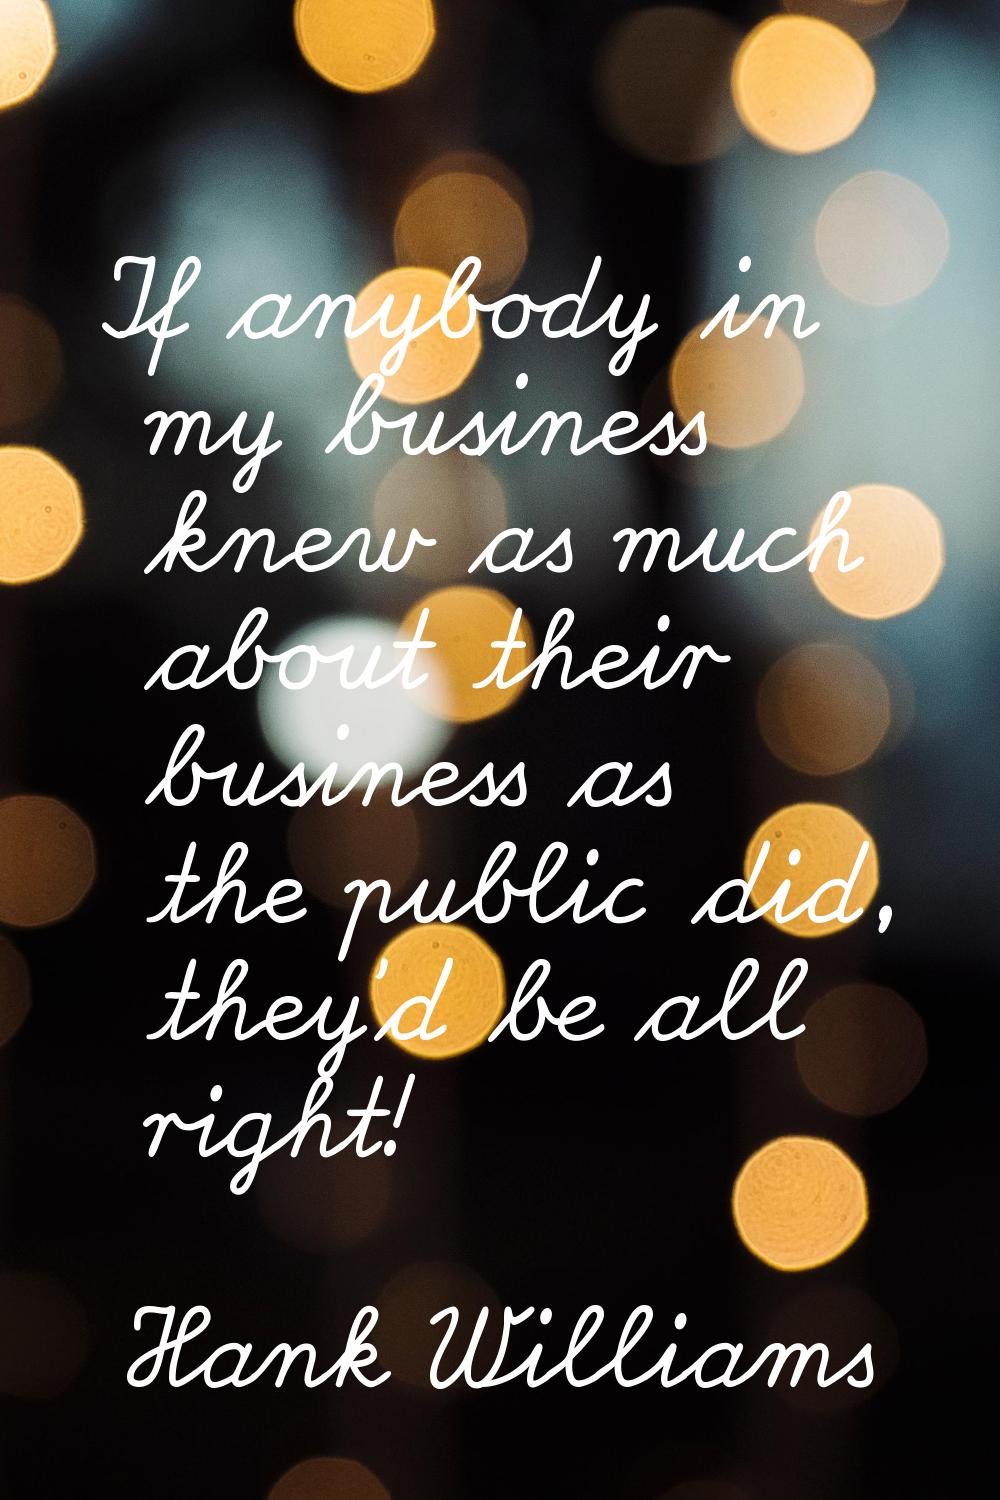 If anybody in my business knew as much about their business as the public did, they'd be all right!